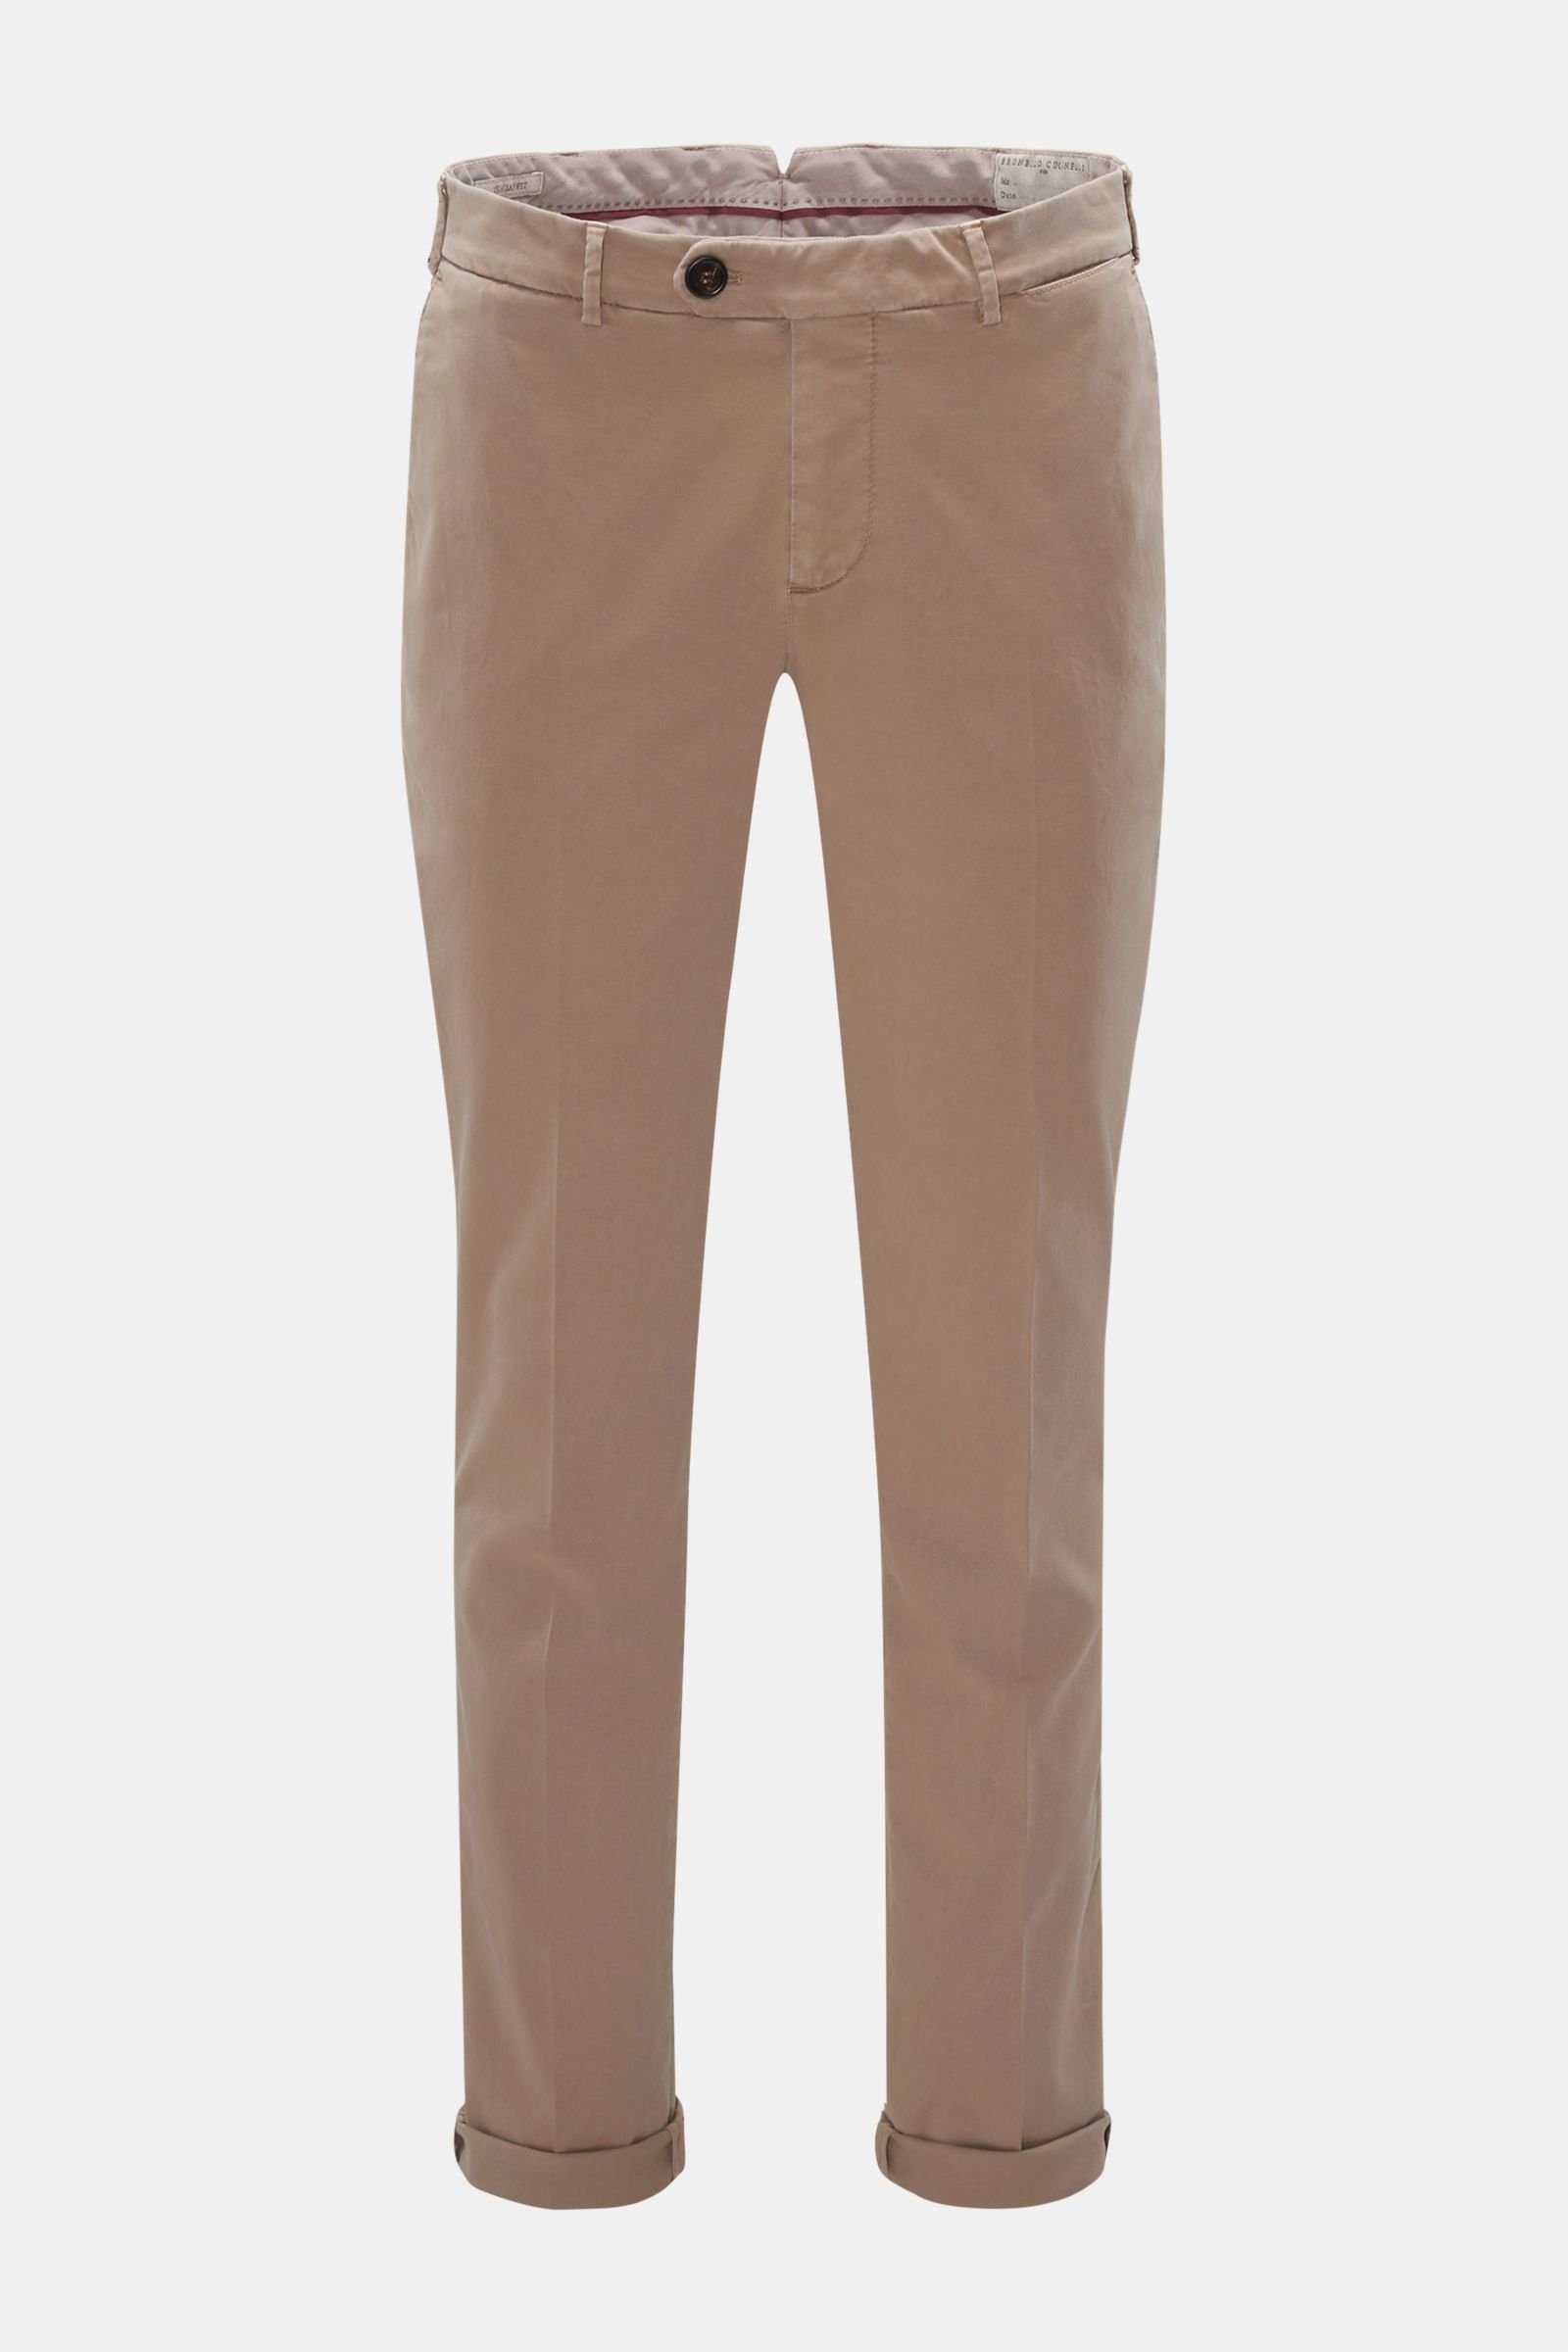 'Traditional Fit' chinos grey-brown